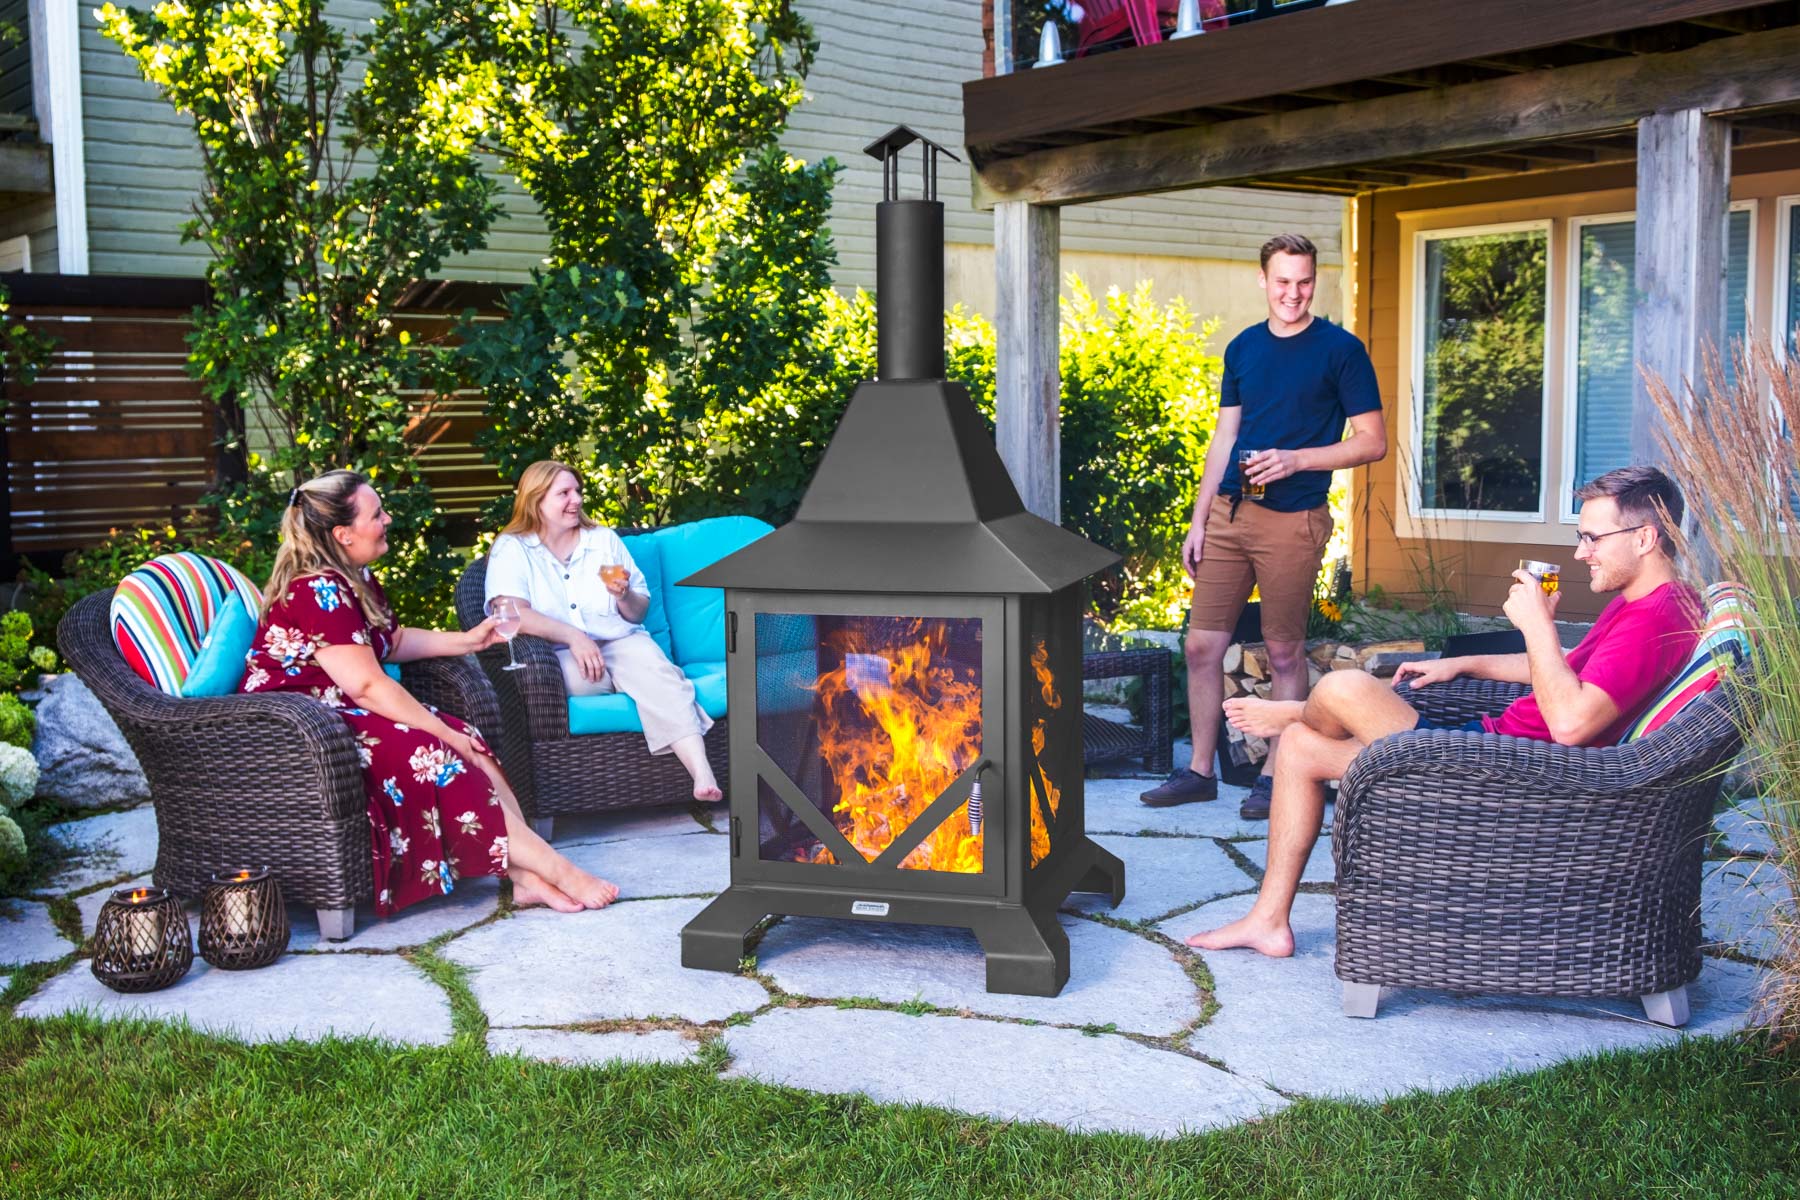 People sitting around chiminea fire pit